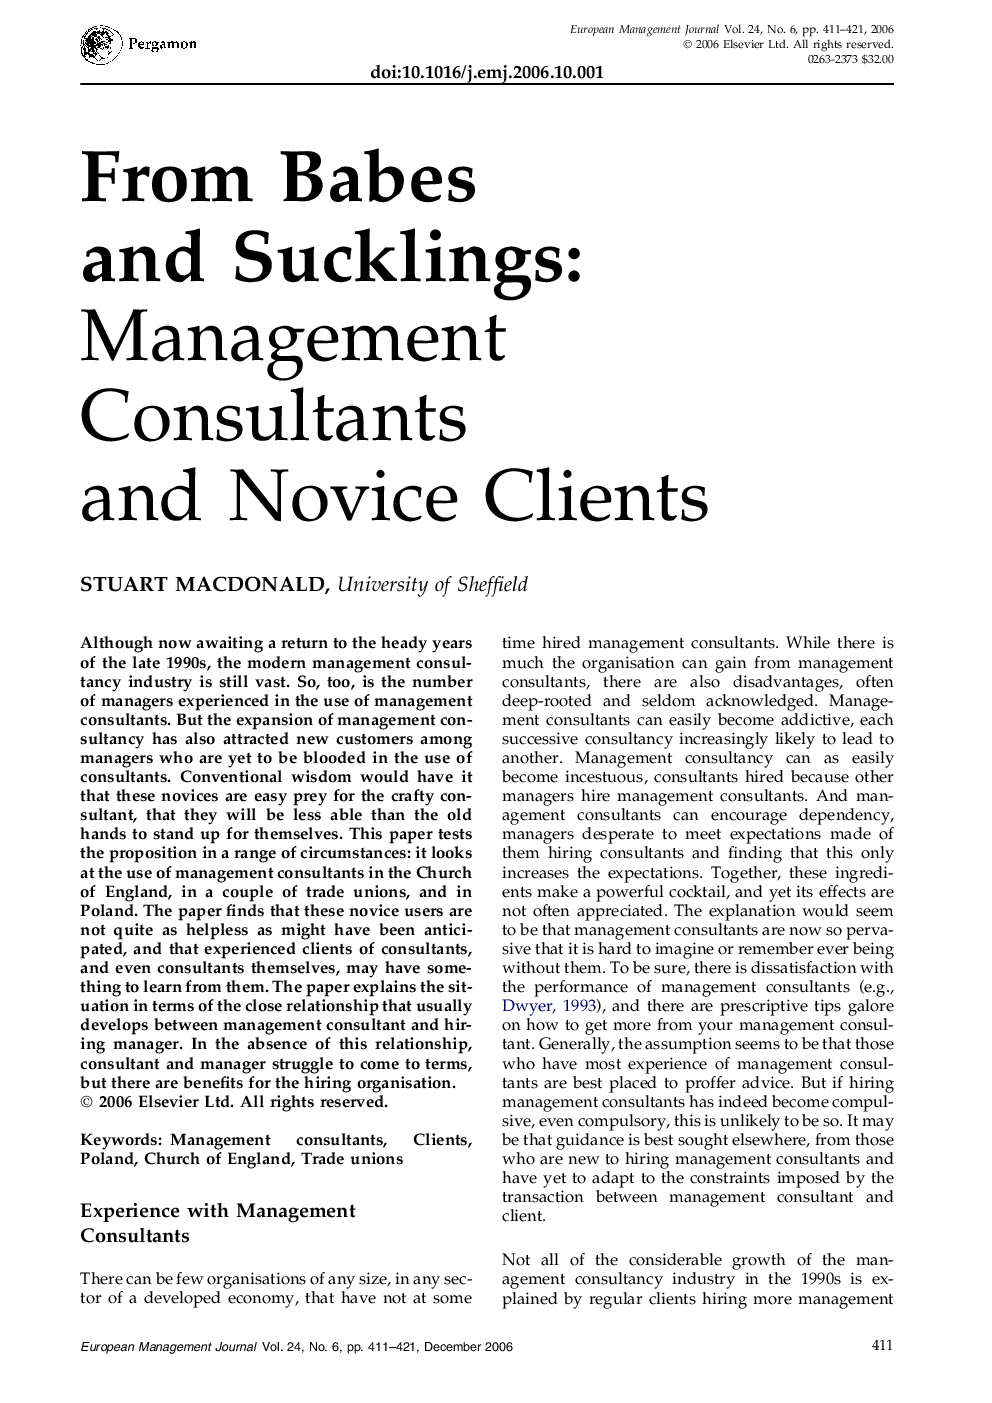 From Babes and Sucklings:: Management Consultants and Novice Clients